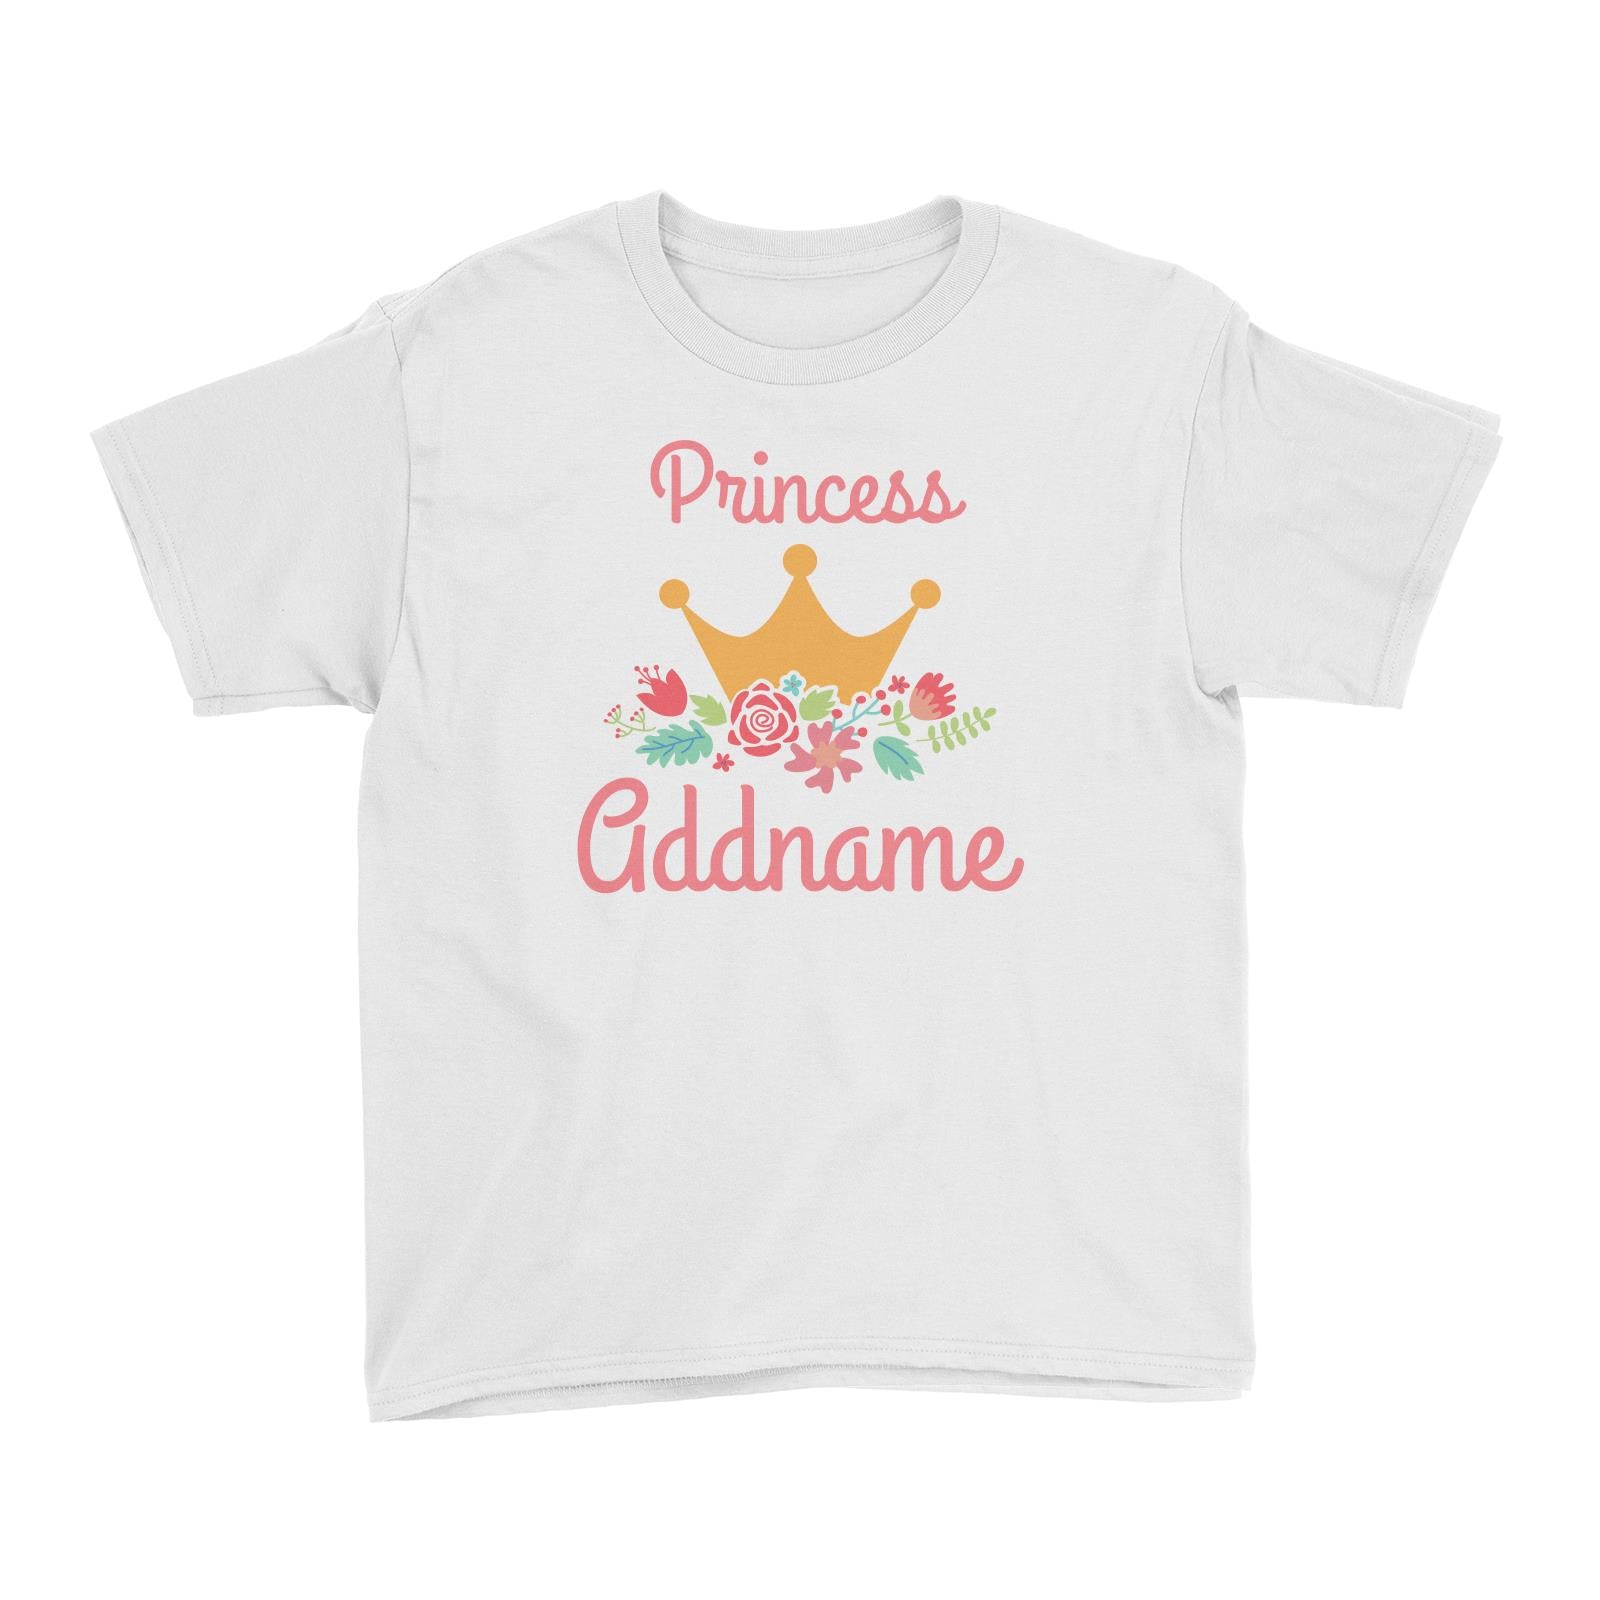 Princess Addname with Tiara and Flowers Kid's T-Shirt